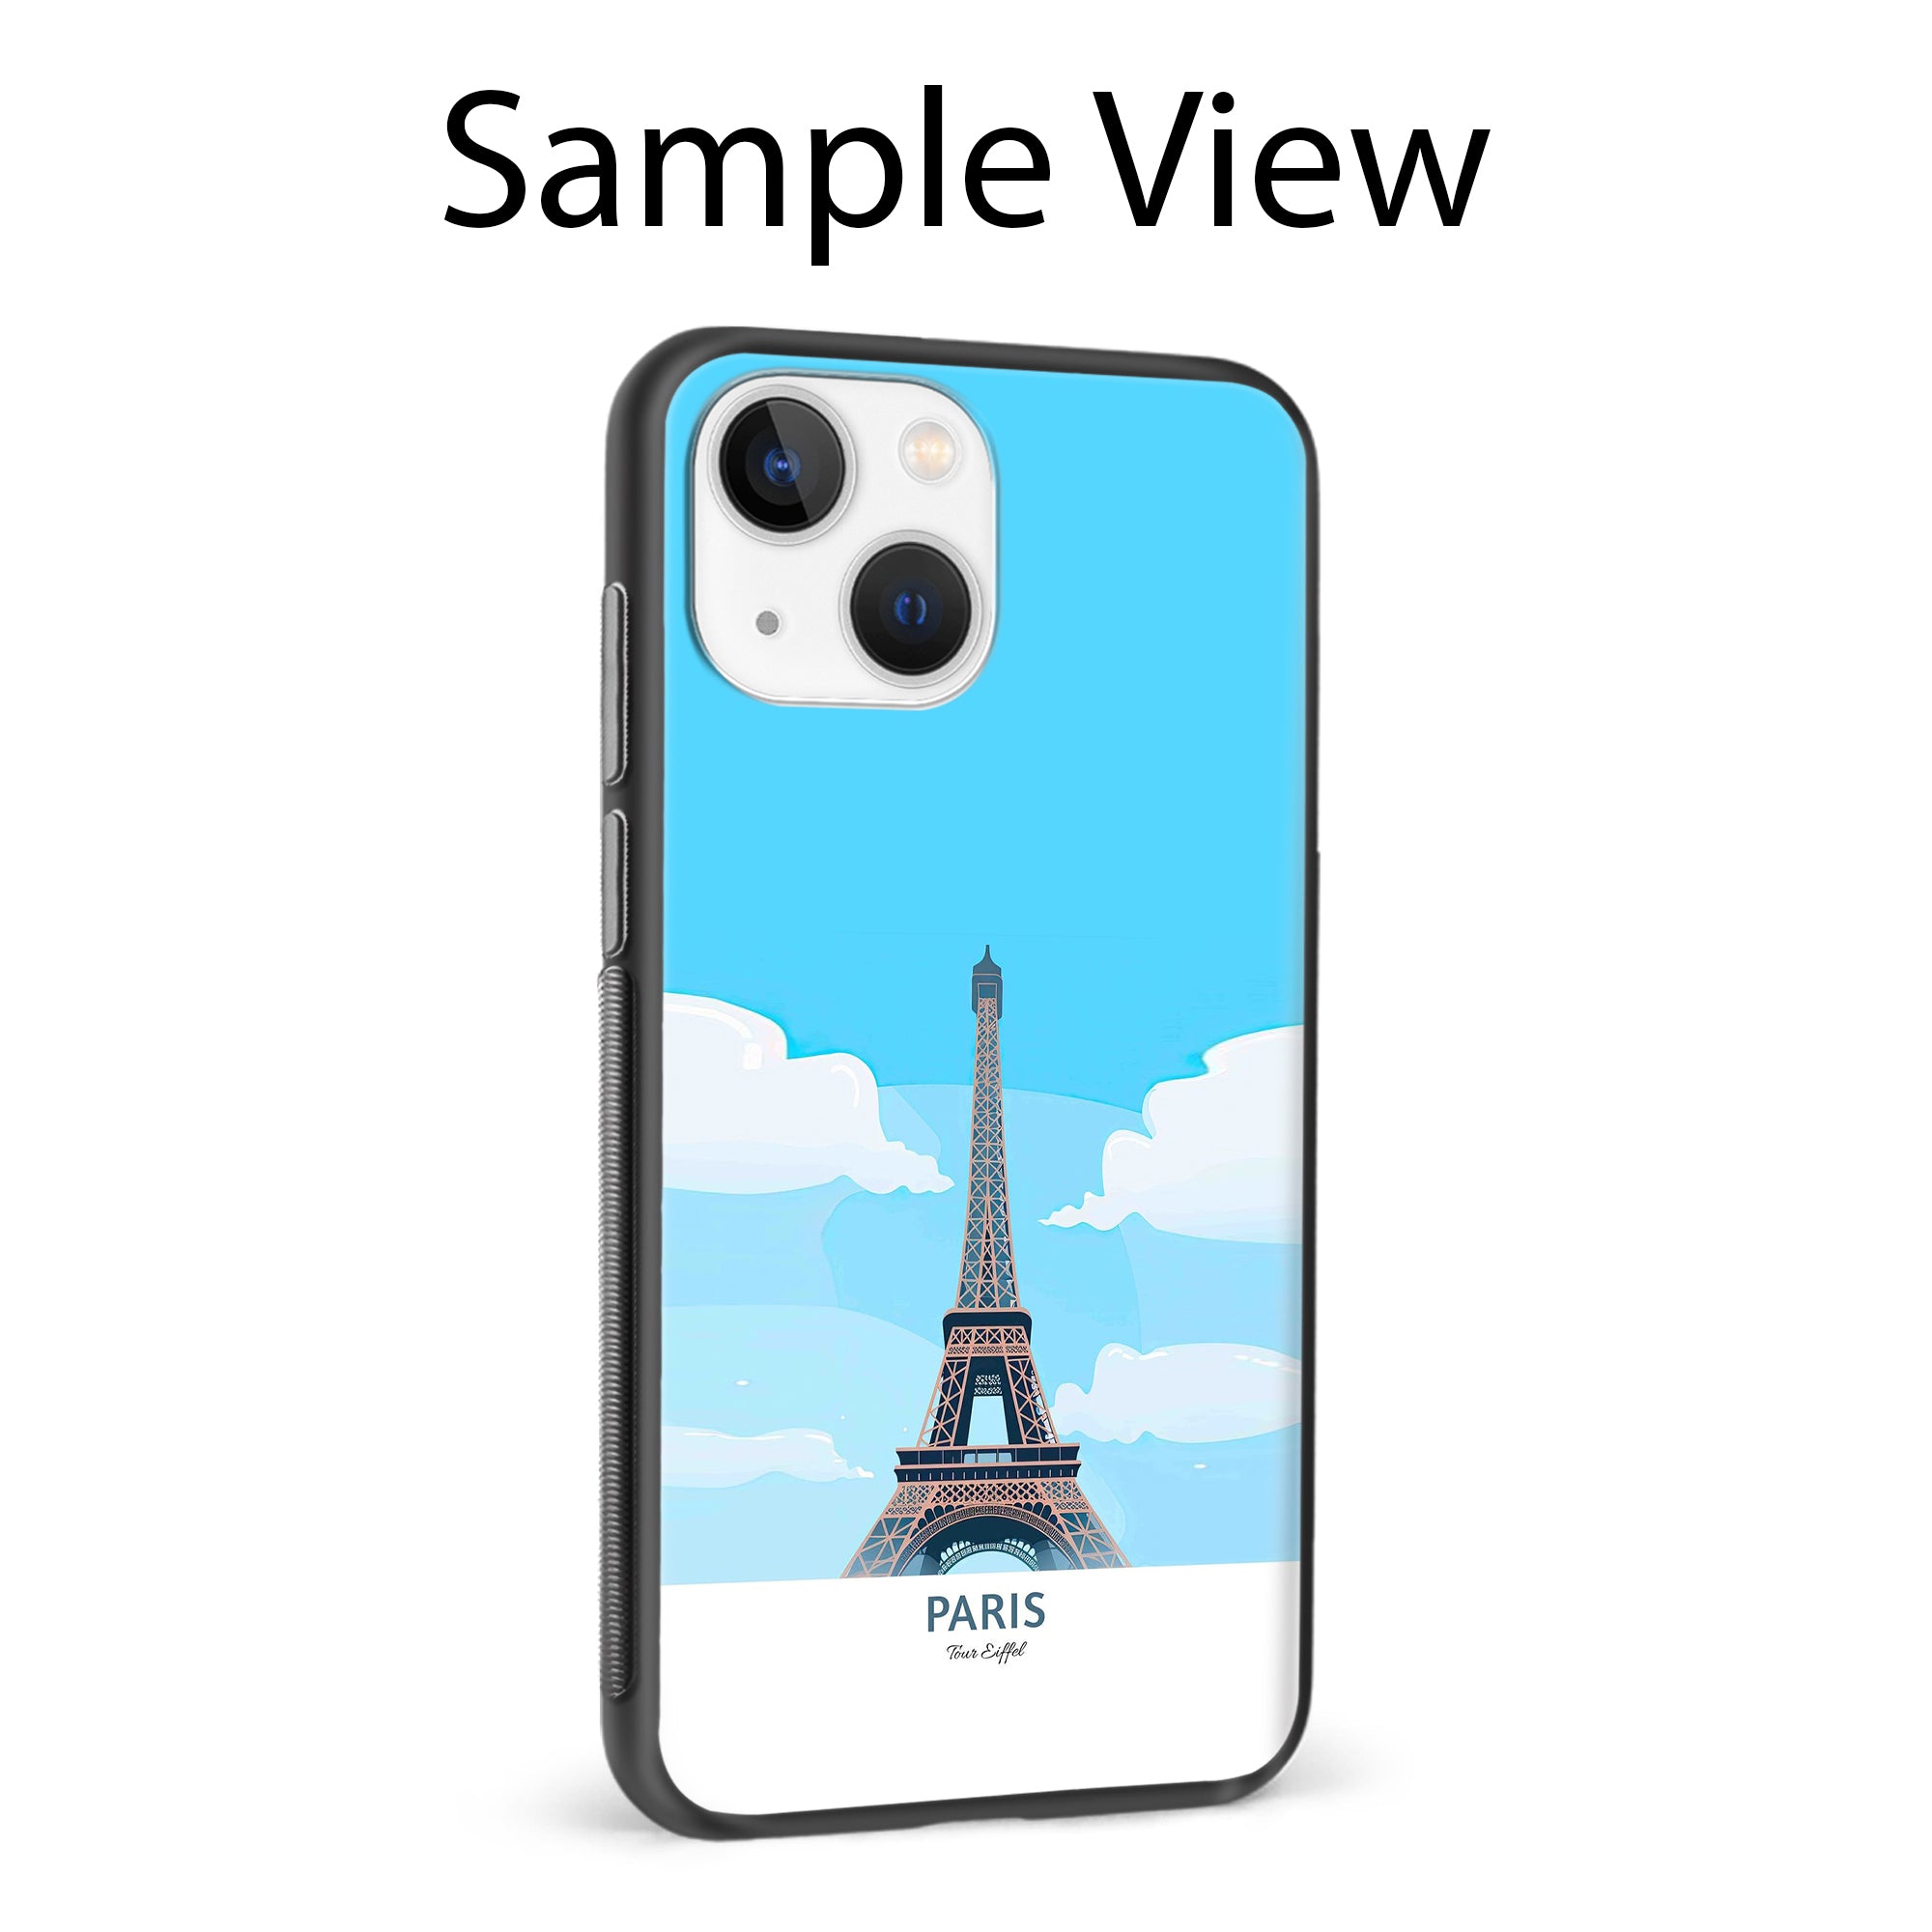 Buy Paris Glass/Metal Back Mobile Phone Case/Cover For Apple iPhone 12 pro Online